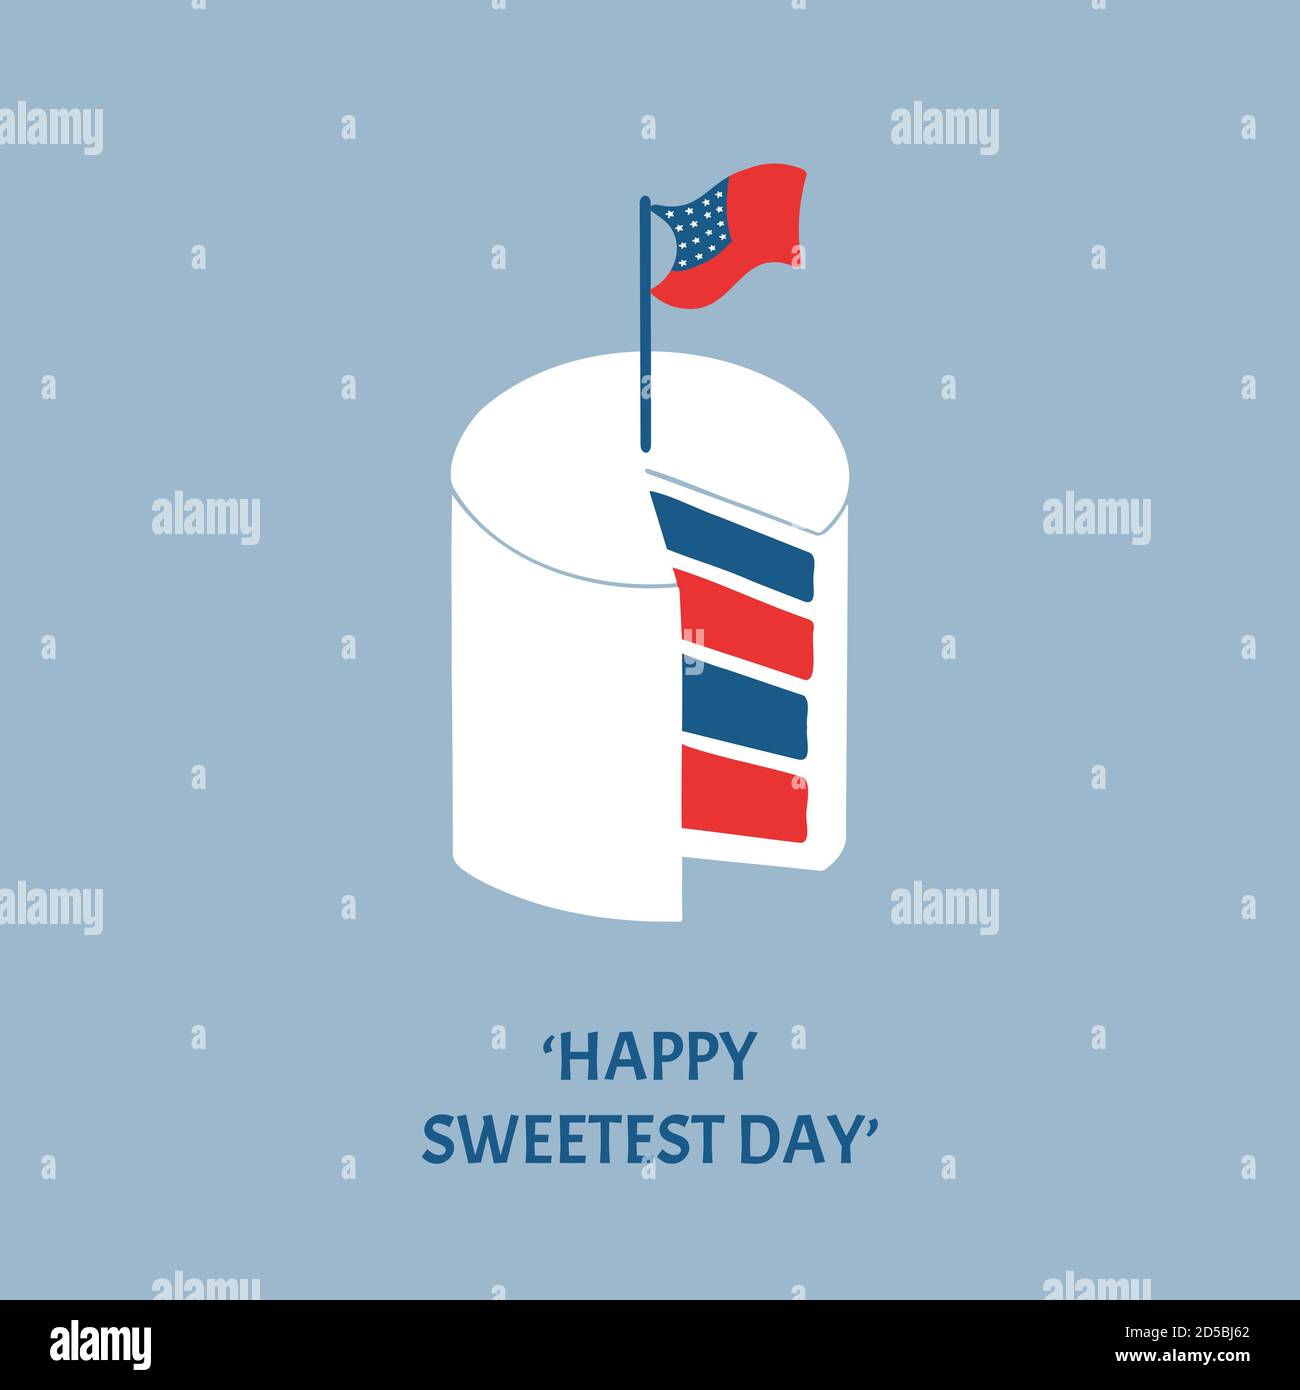 Happy Sweetest Day. Minimalist vector cake in the colors of the American flag and a small flag in the center. Stock Vector